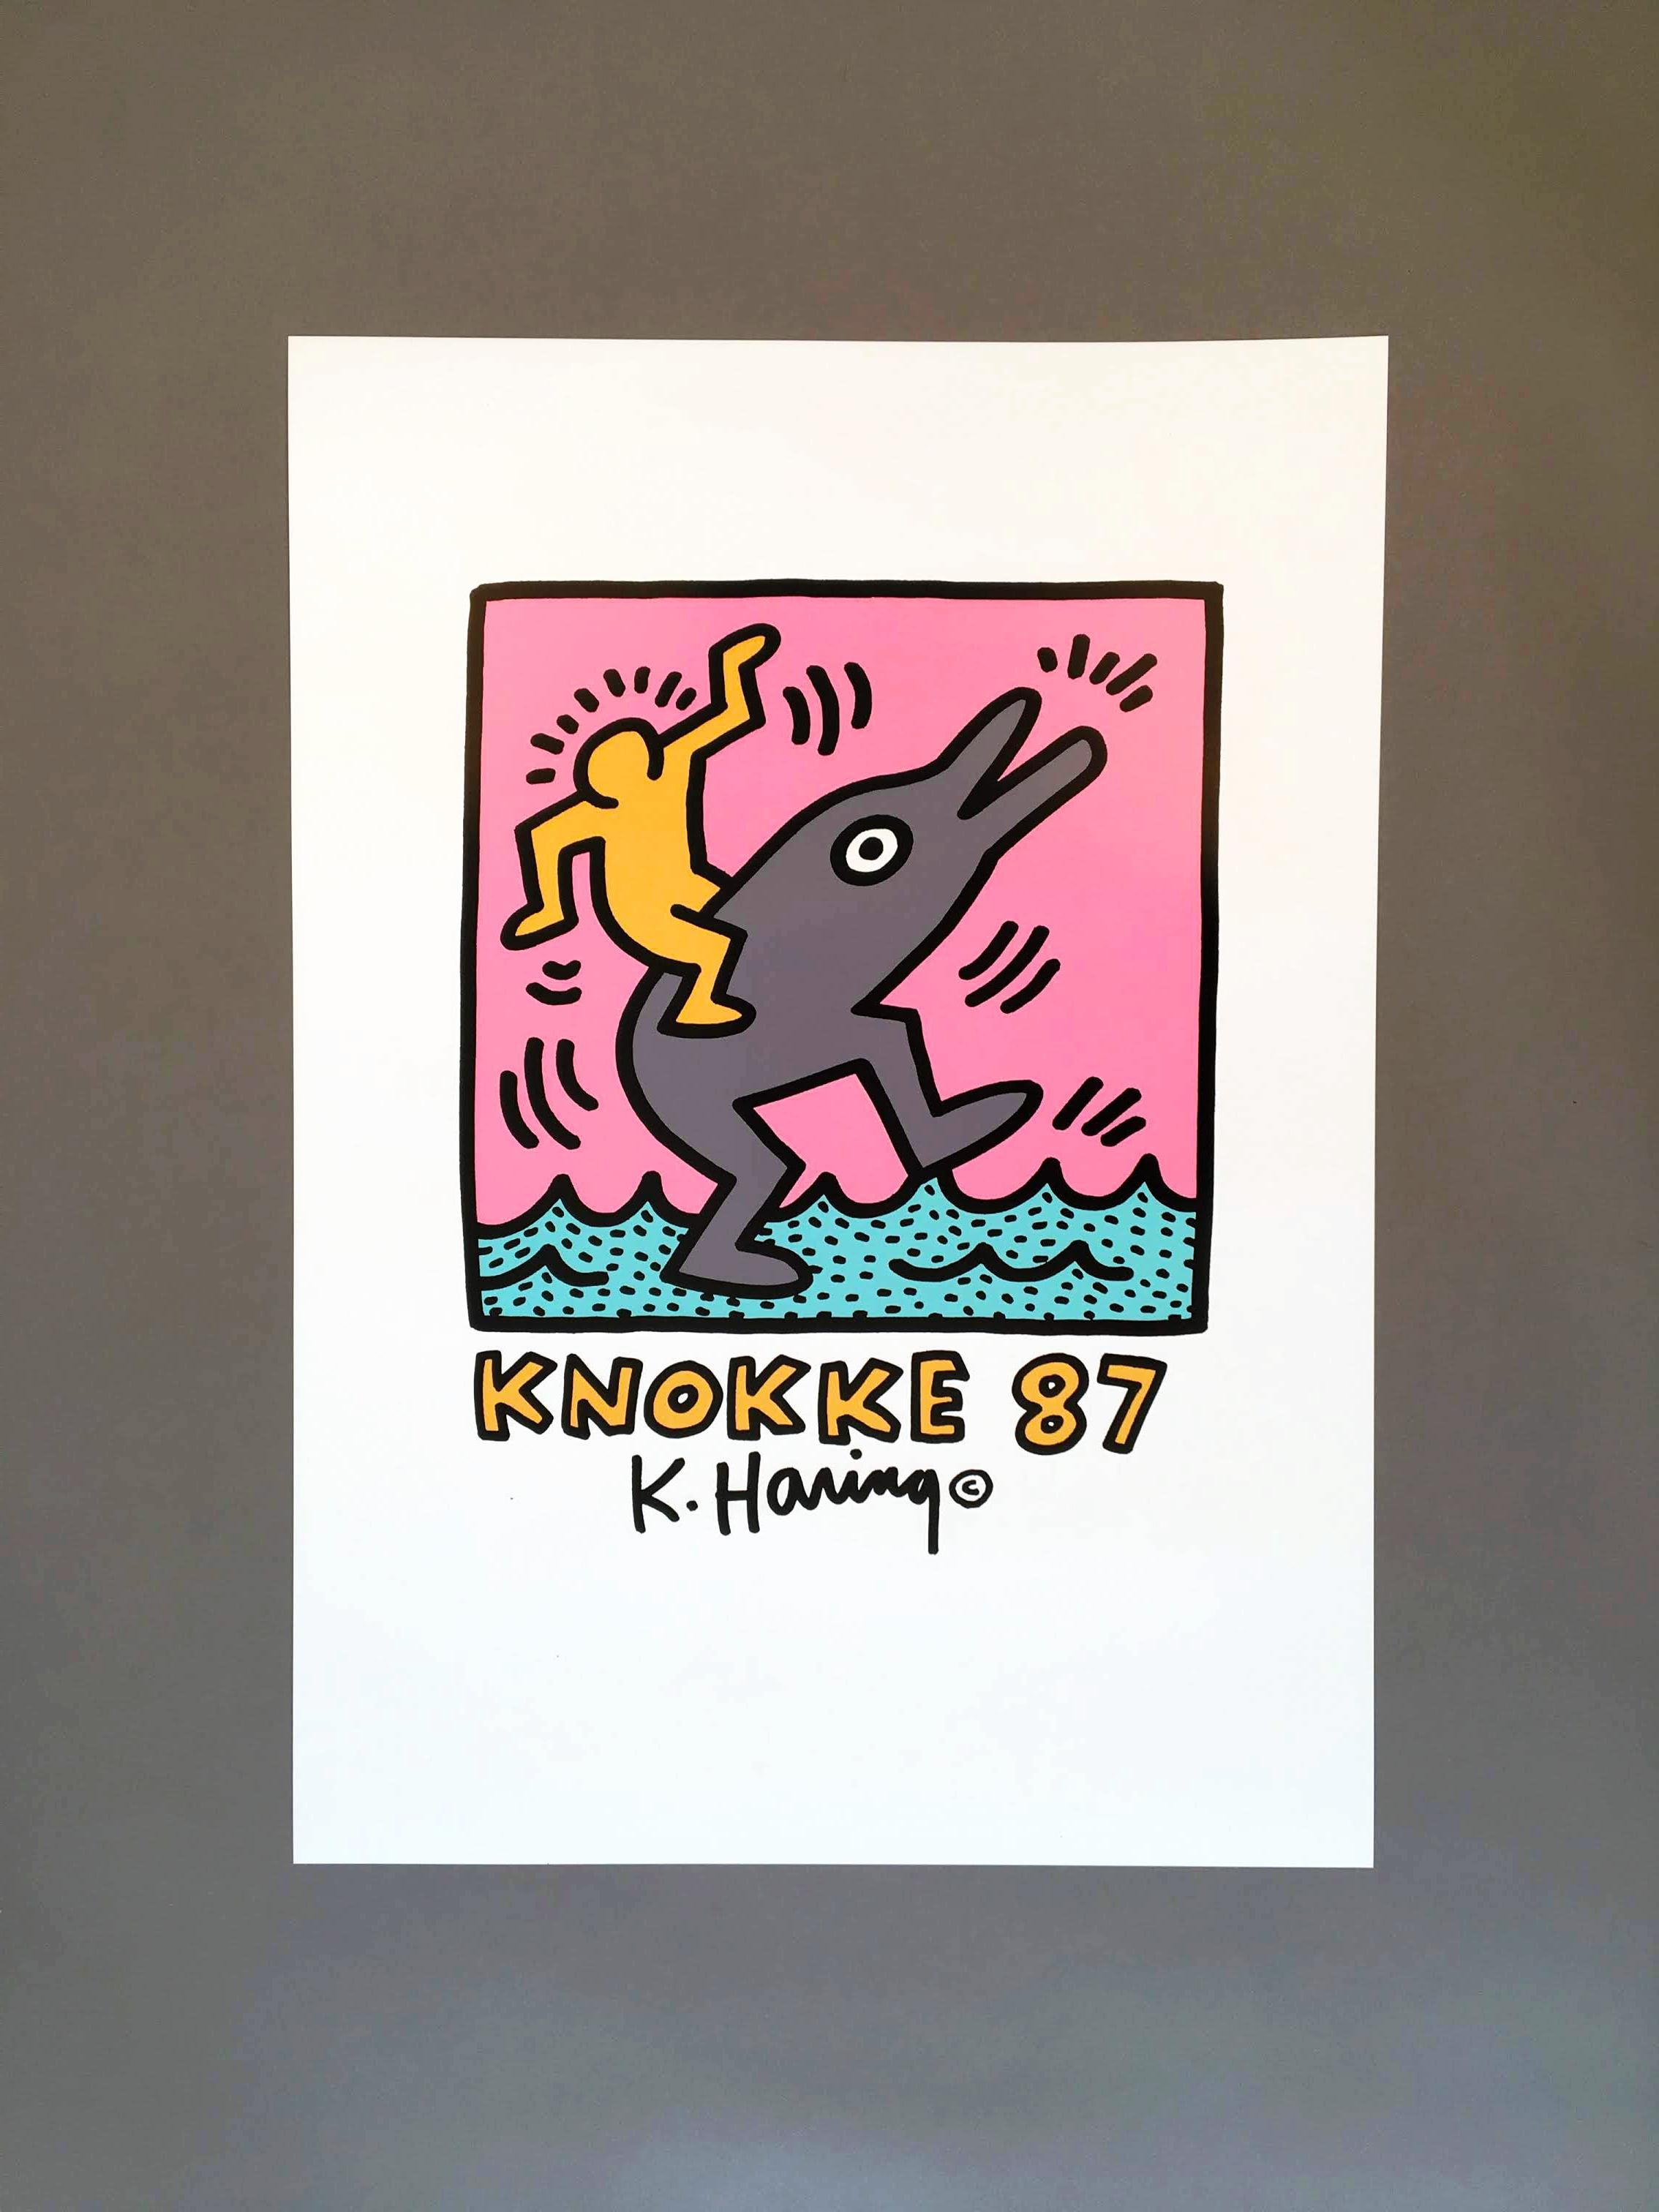 Keith Haring (United States, 1958-1990)
'Casino Knokke', 1987.
 
Lively print created to promote a Haring exhibition in 1987 at the beautiful and prestigious seaside Casino Knokke, Belgium.
 
Offset-lithograph
510 x 700 mm (20 x 27.5 in)
Signed in